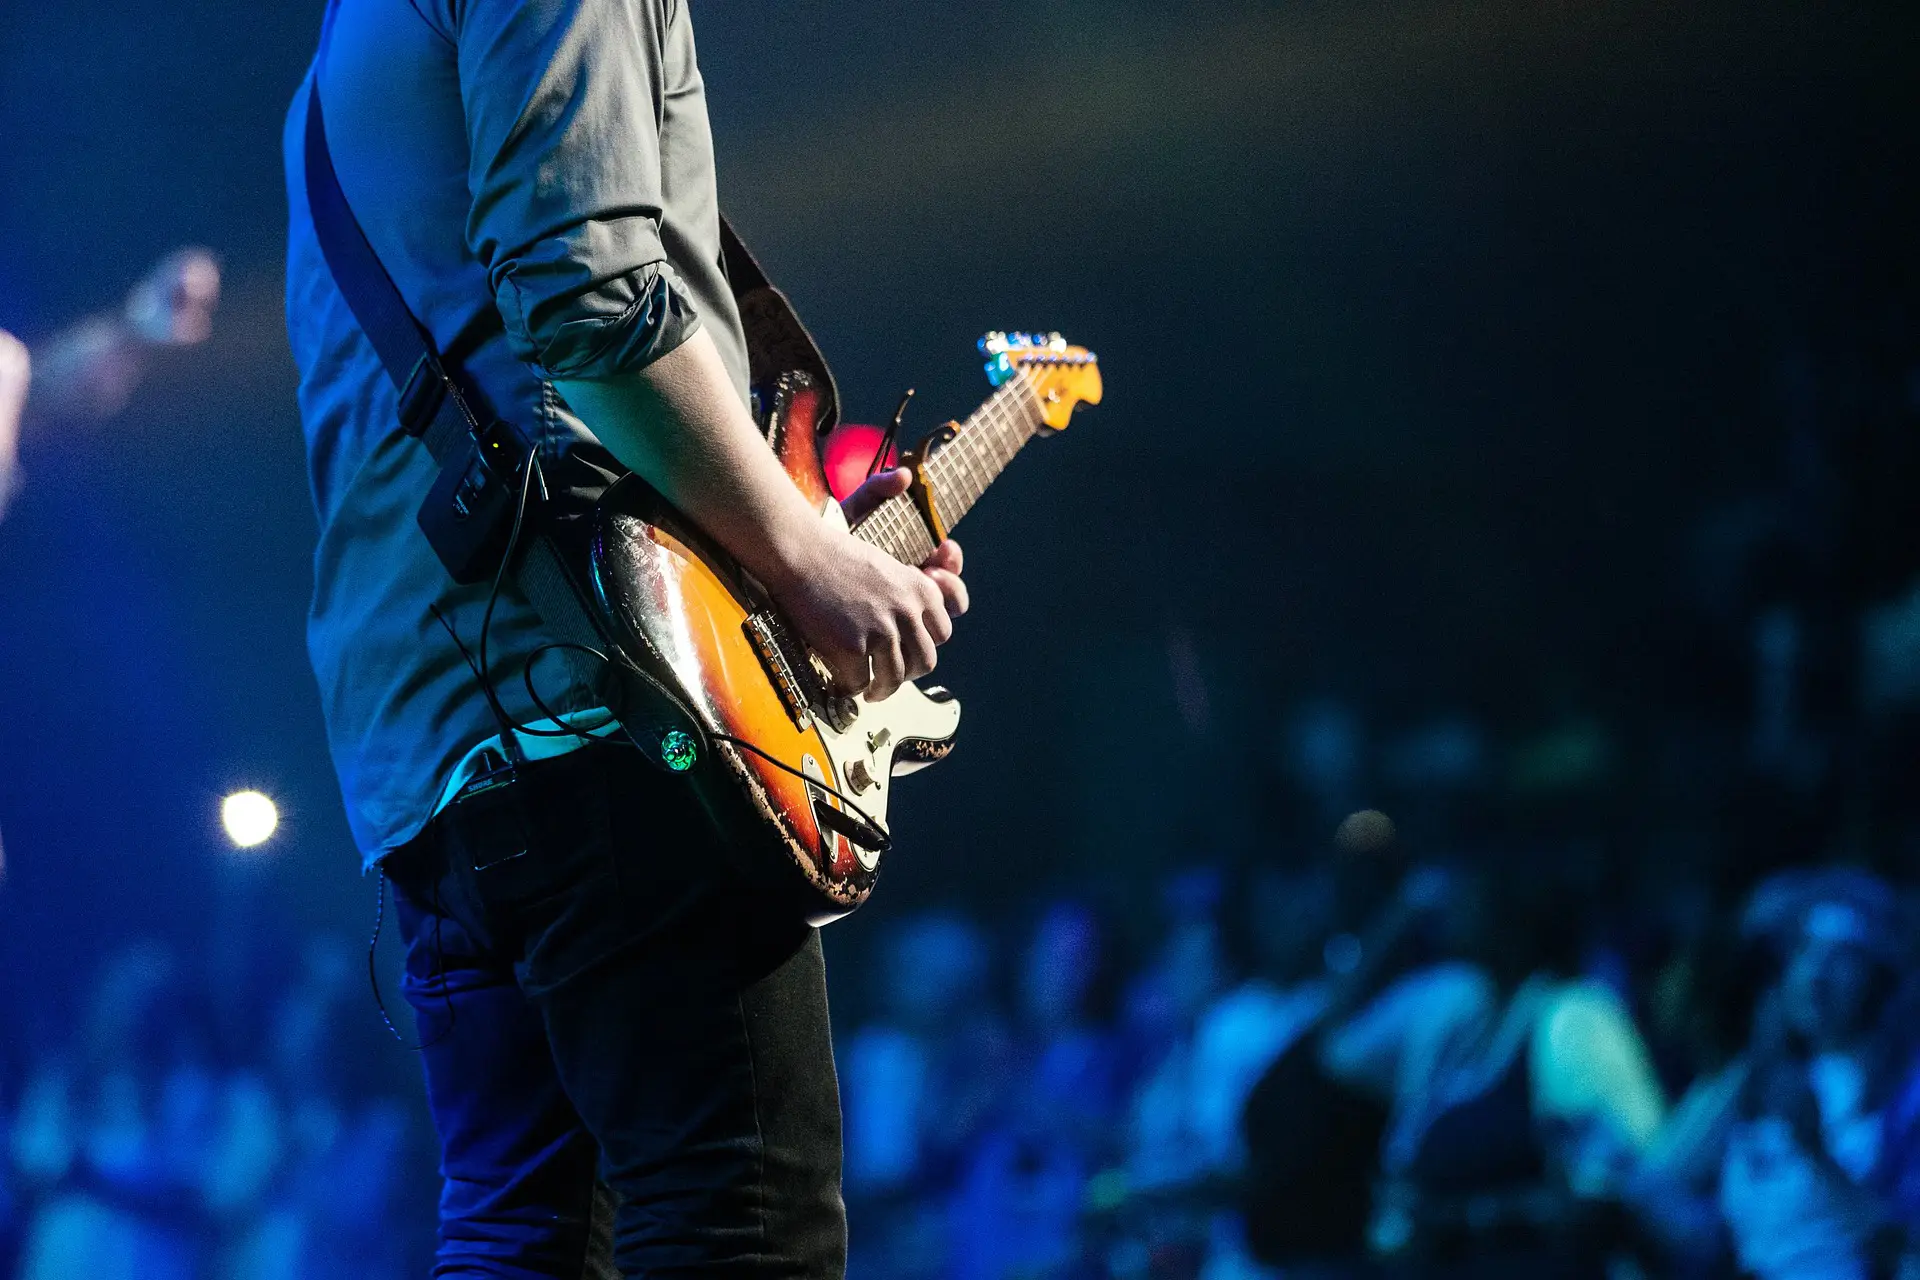 In the picture, a man playing the guitar in front of a crowd.